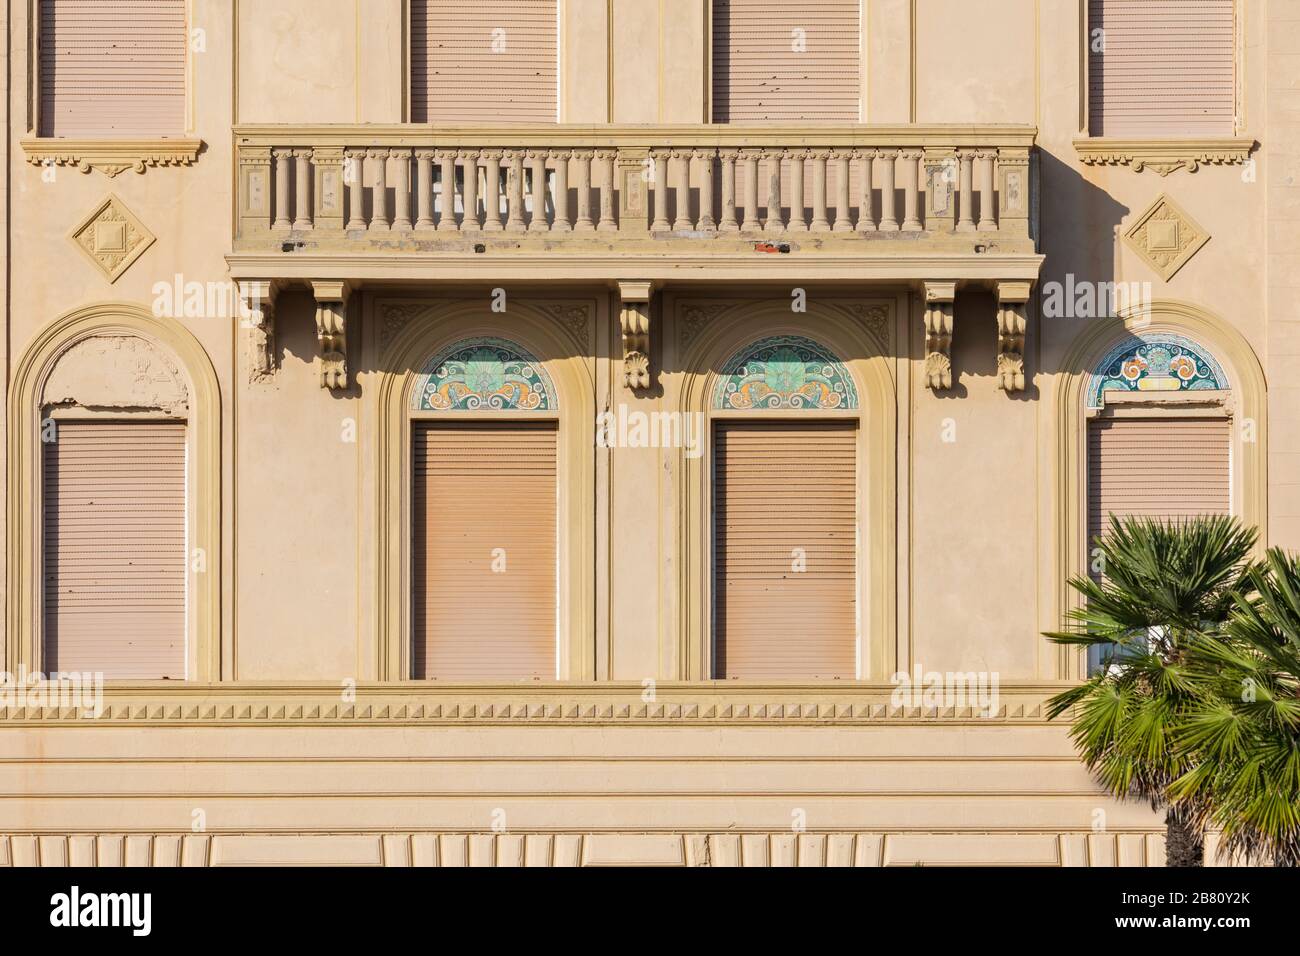 The Grand Hotel Excelsior has a Liberty-Style architectural facade typical in Viareggio, Tuscany, Italy. Stock Photo